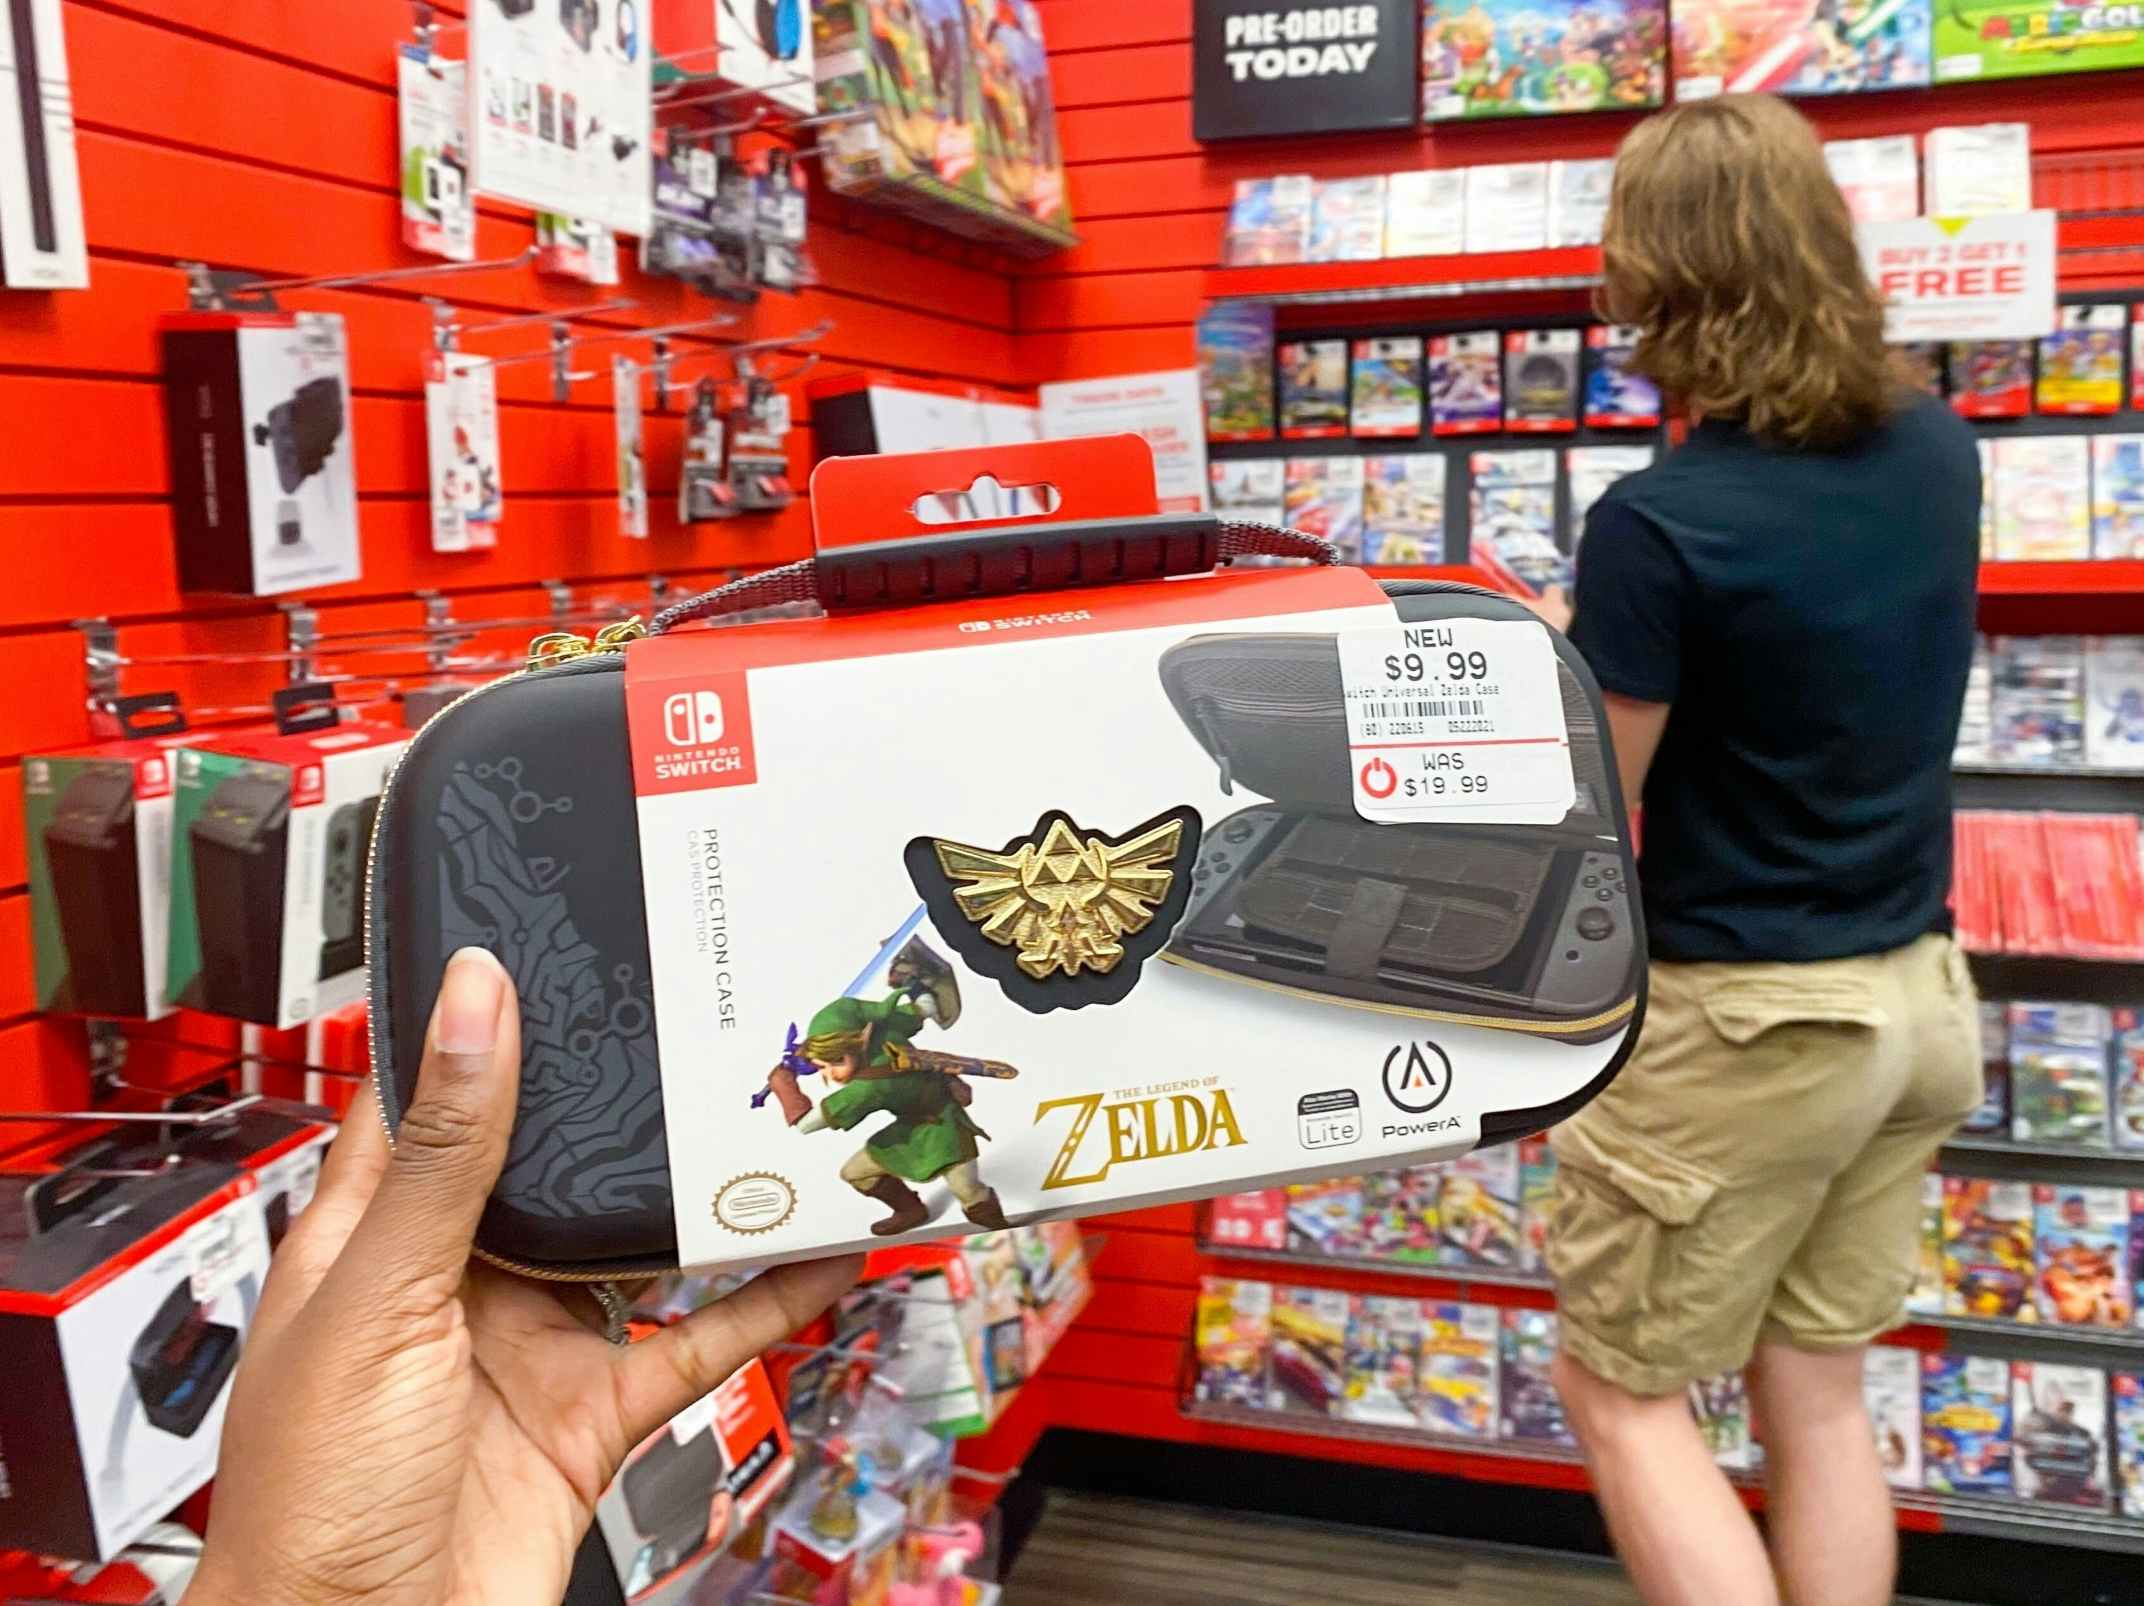 A person's hand holding up a Nintendo Switch Legend of Zelda carrying case inside a GameStop store with someone looking at games in the background.